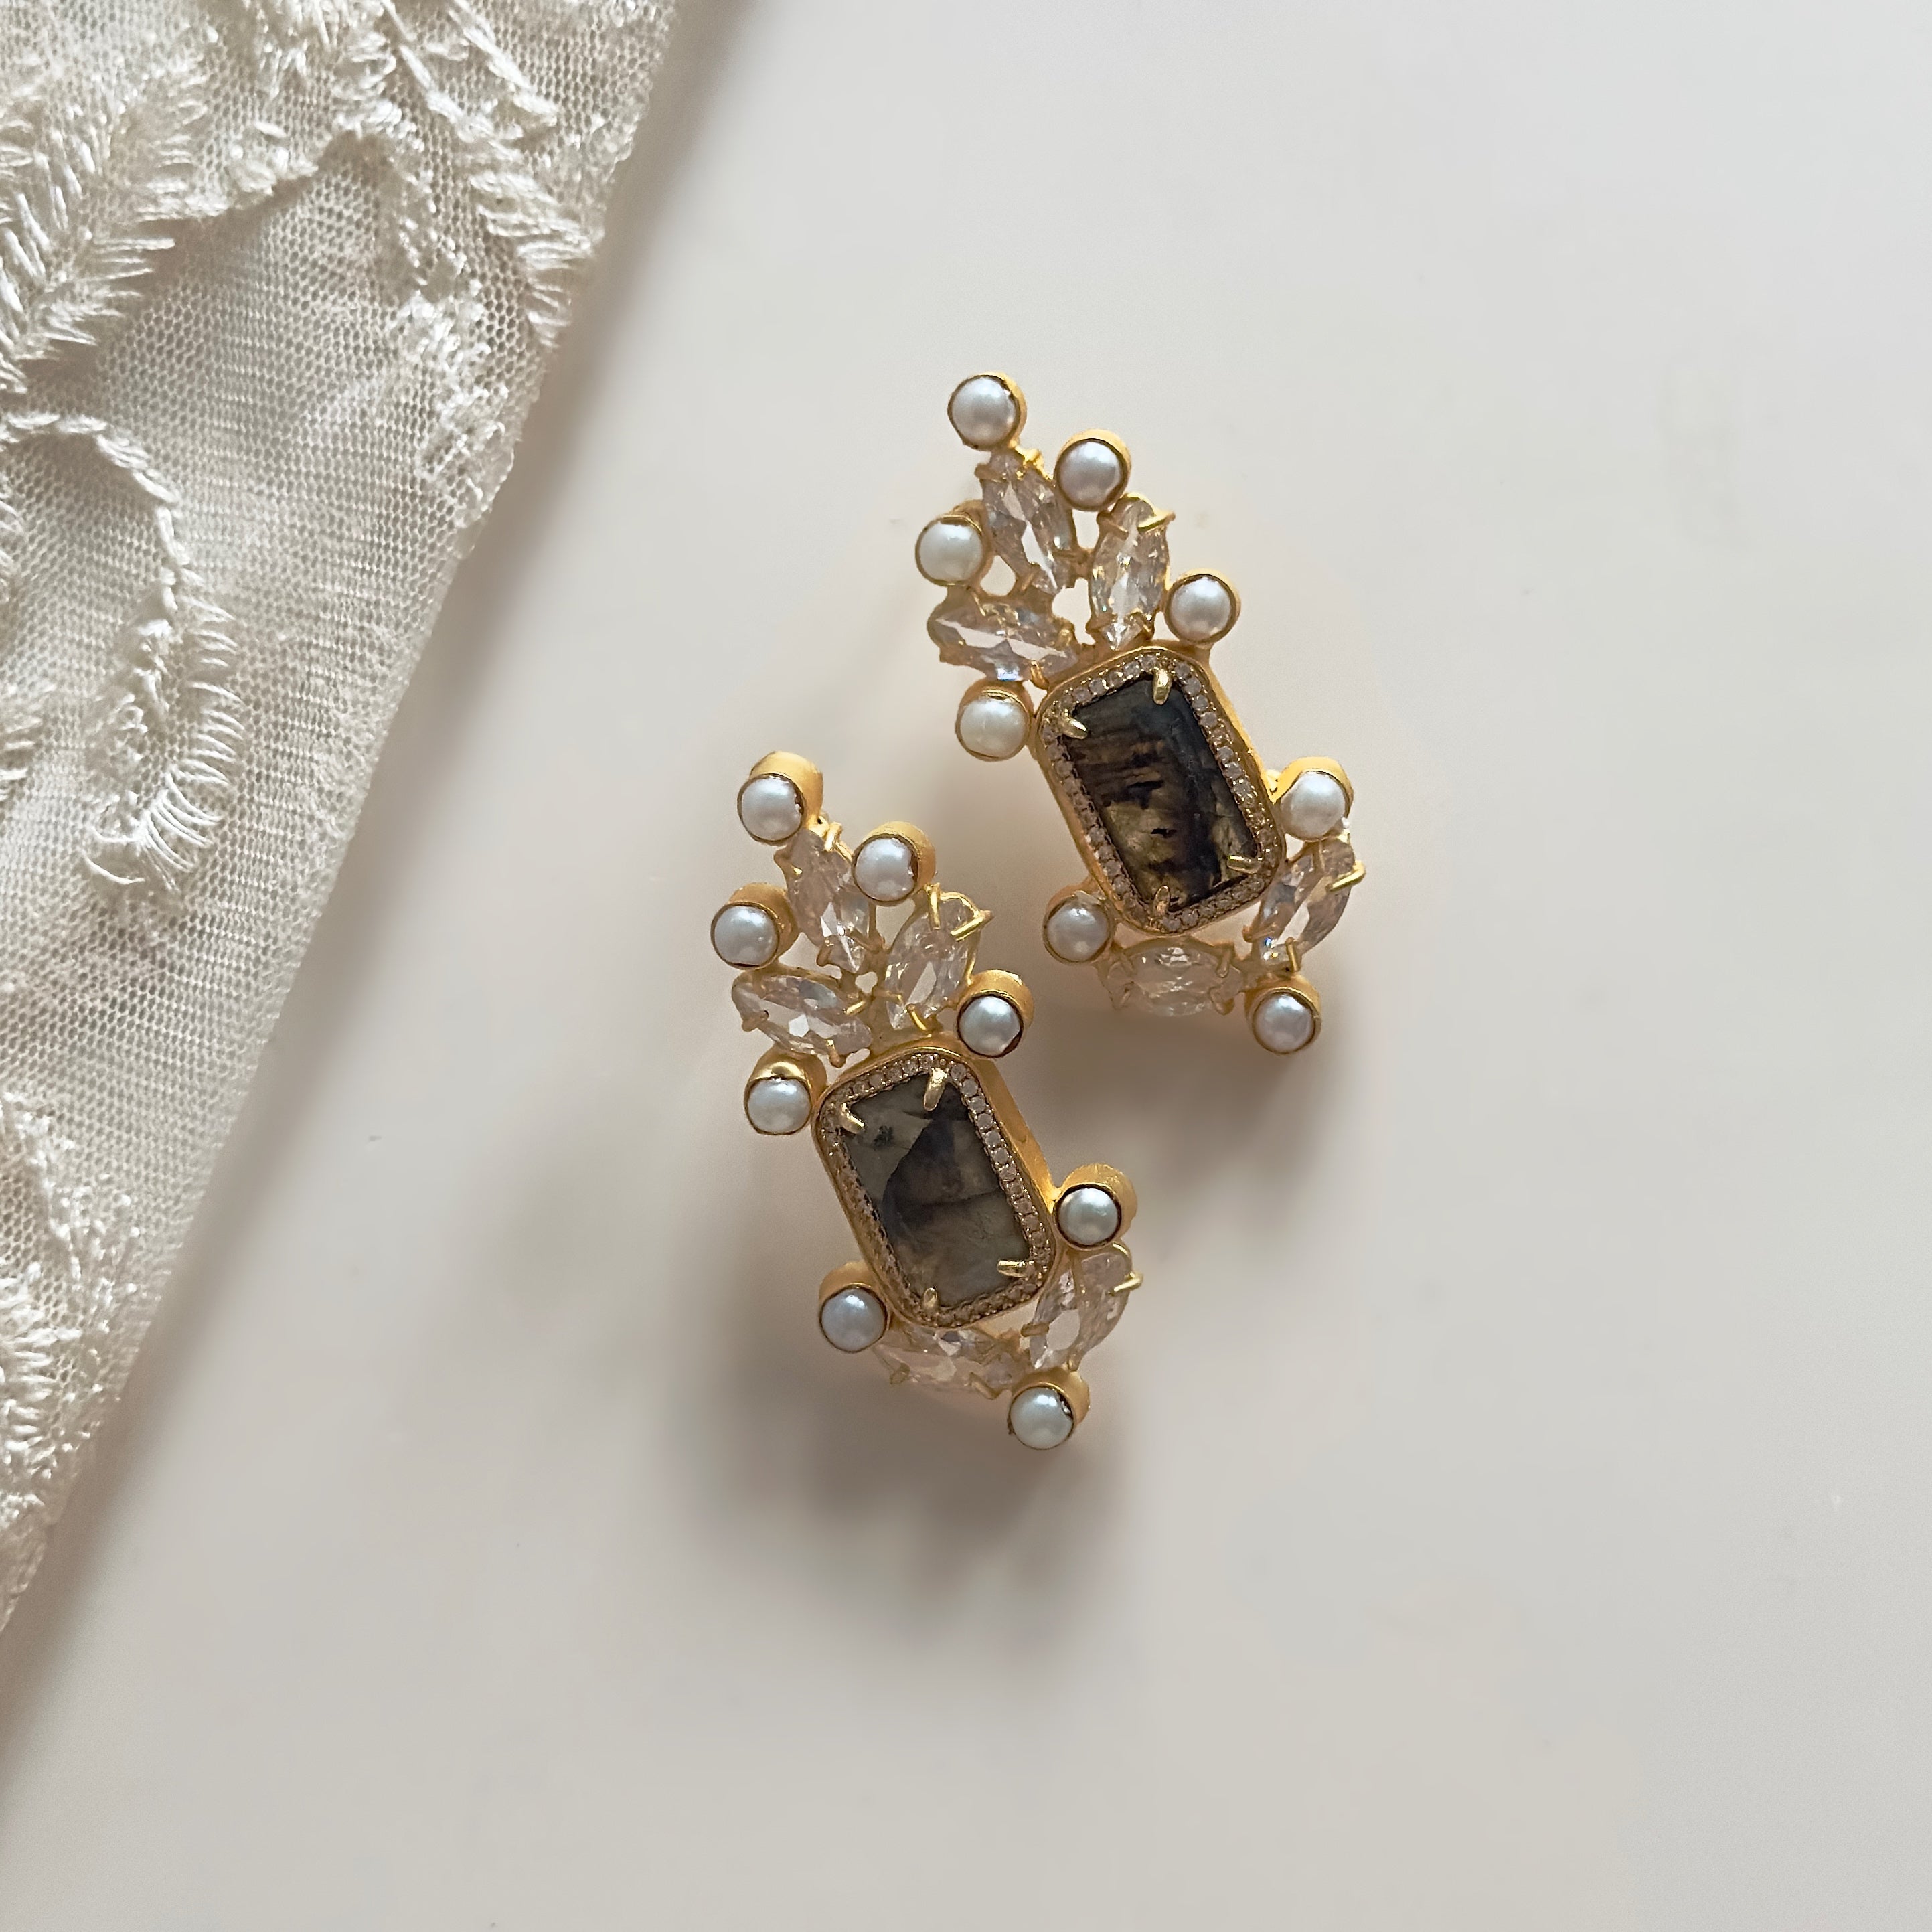 Elevate your style with our Eva Smokey Crystal Earrings. Featuring an elegant design, these earrings are the perfect accessory to add a touch of sophistication to any outfit. Feel confident and effortlessly stylish with these stunning earrings.